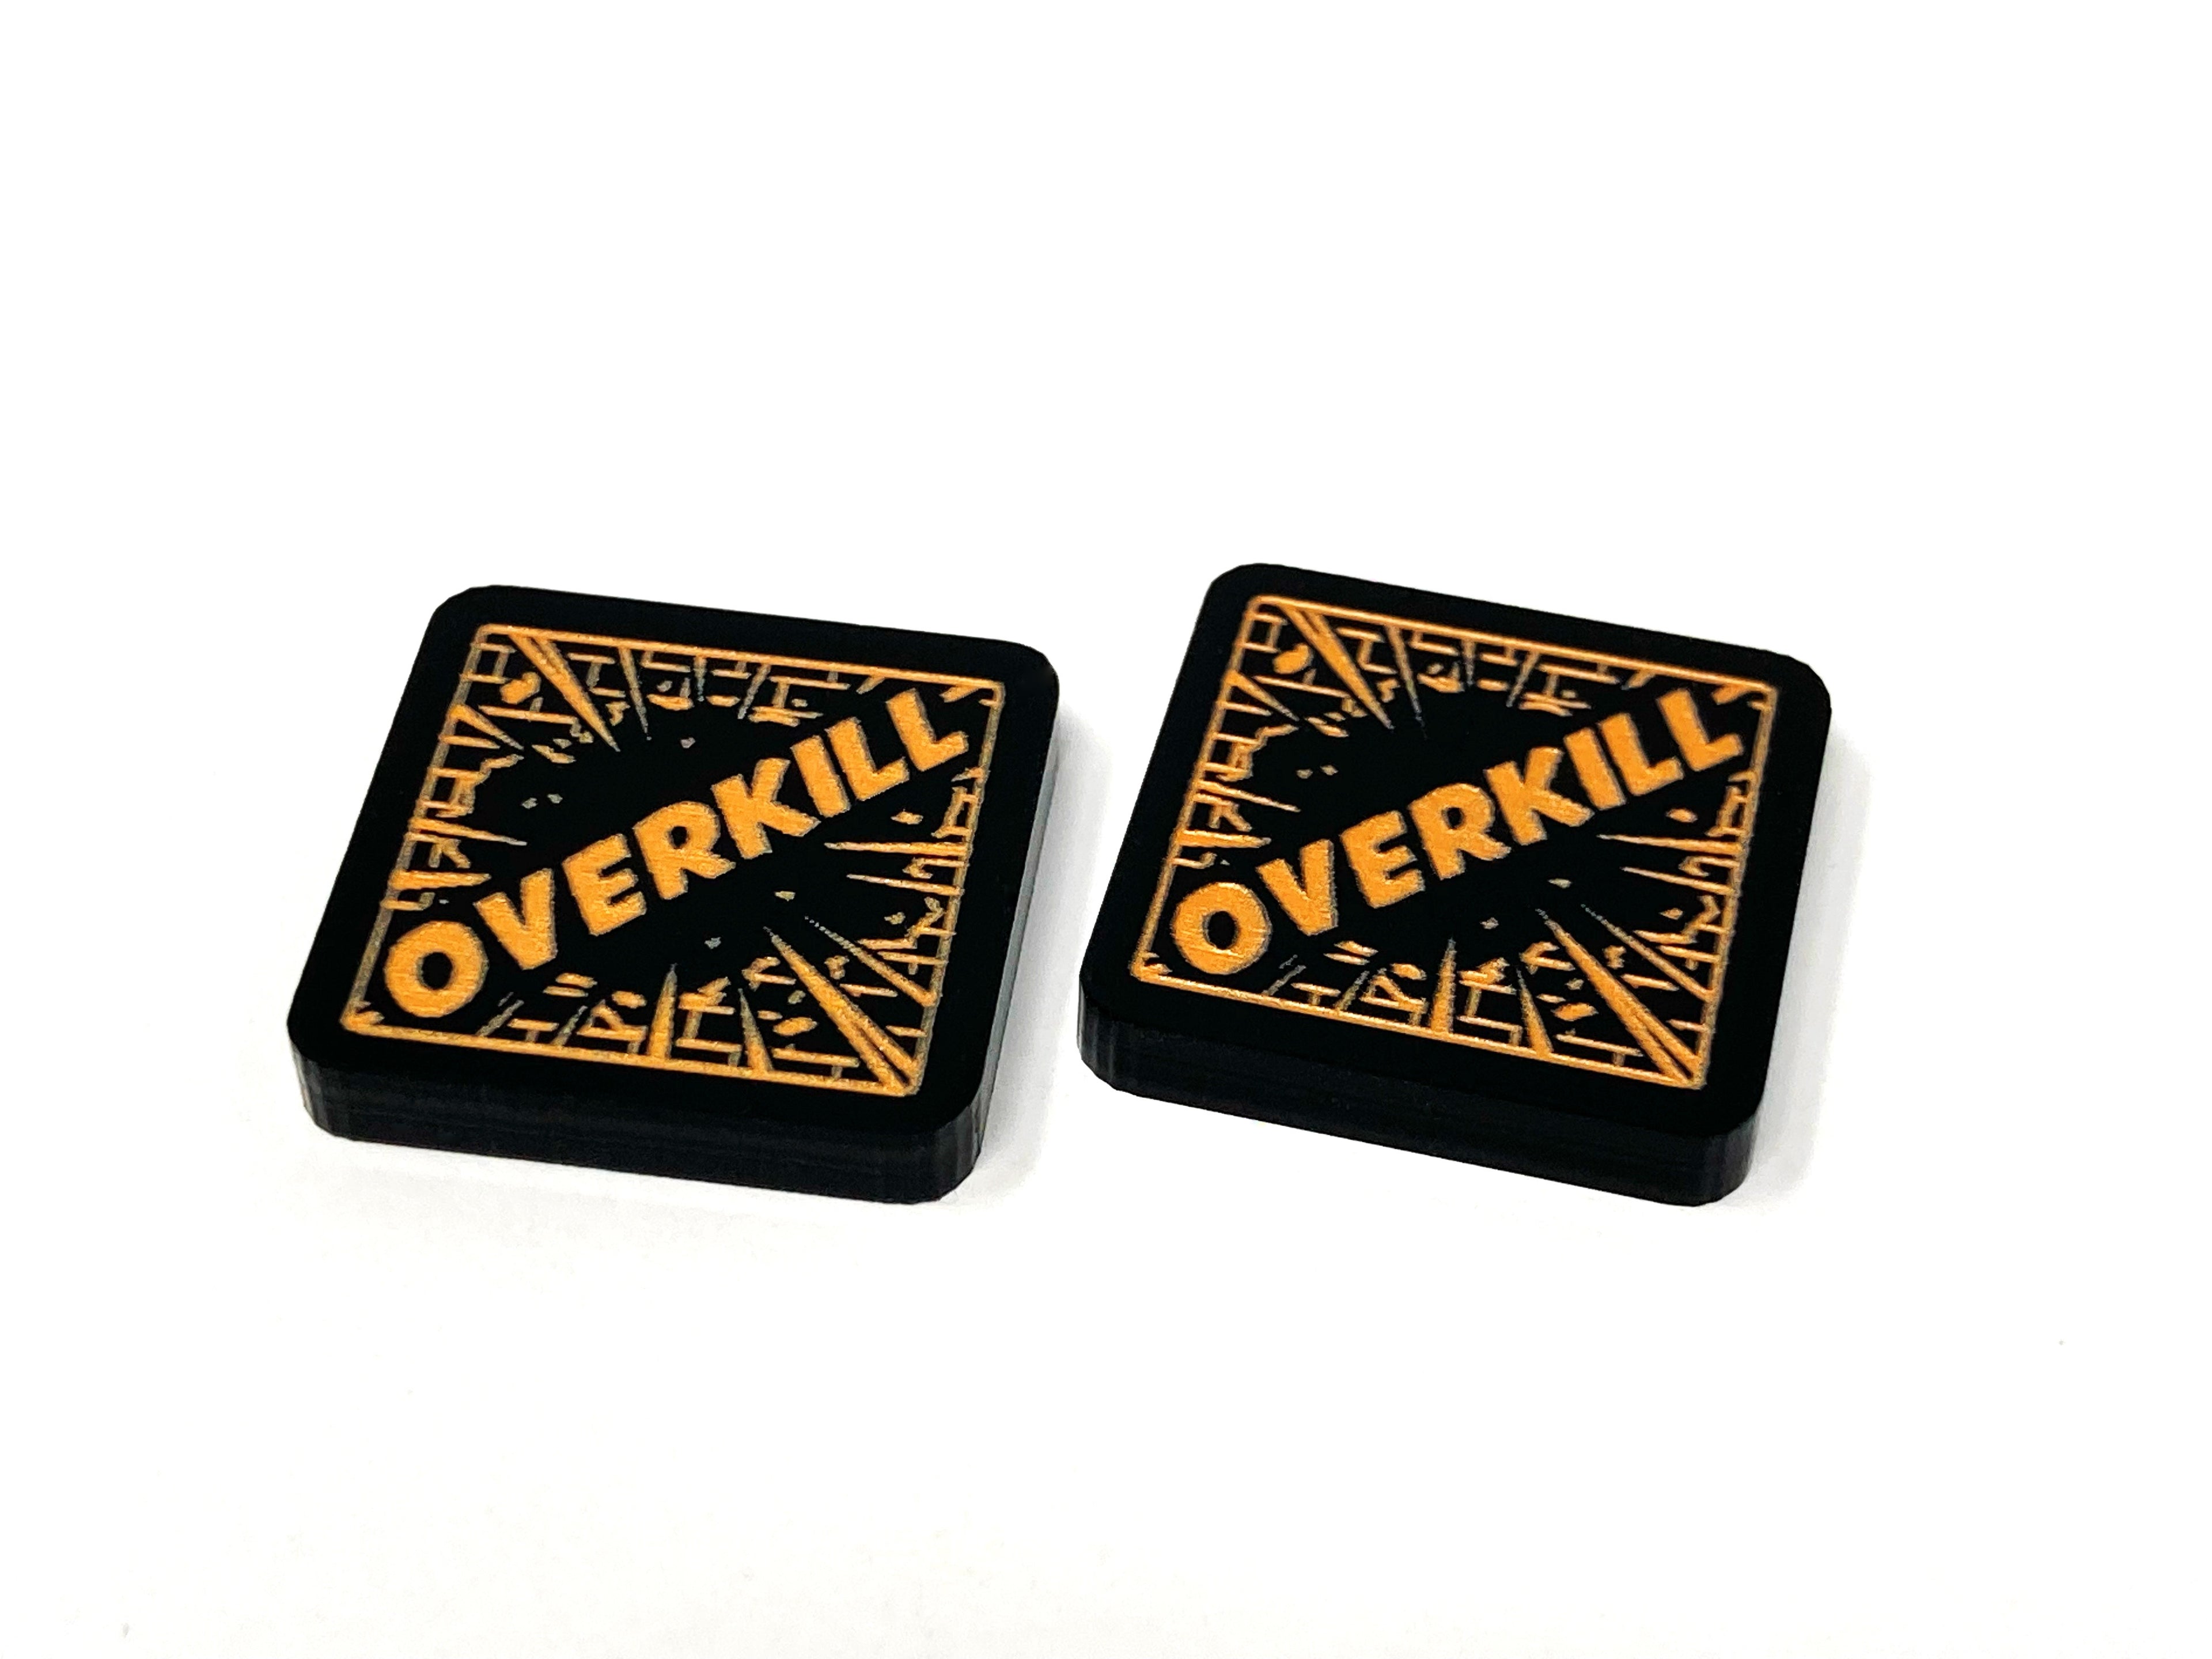 2 x Overkill Tokens (double sided) for Marvel Champions LCG